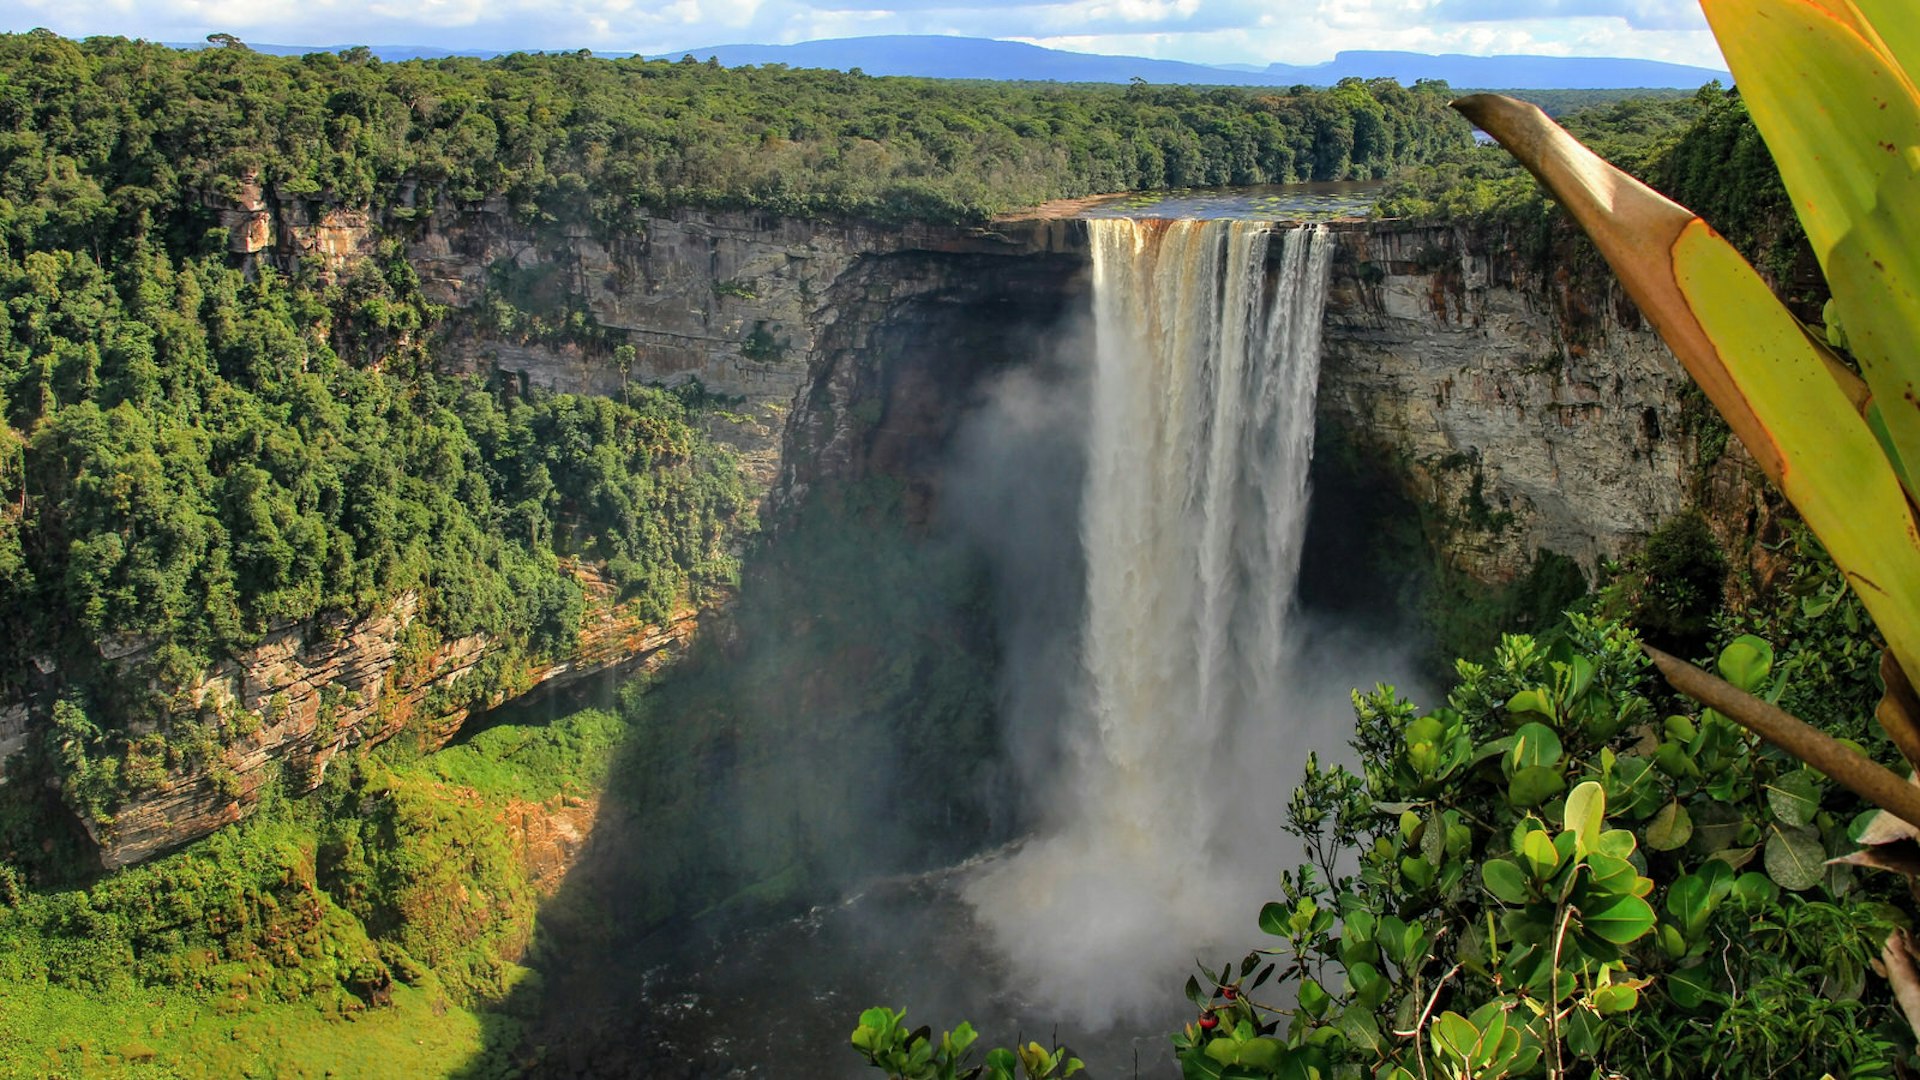 Kaieteur Falls, a massive 226m waterfall in the middle of a the jungle in Guyana